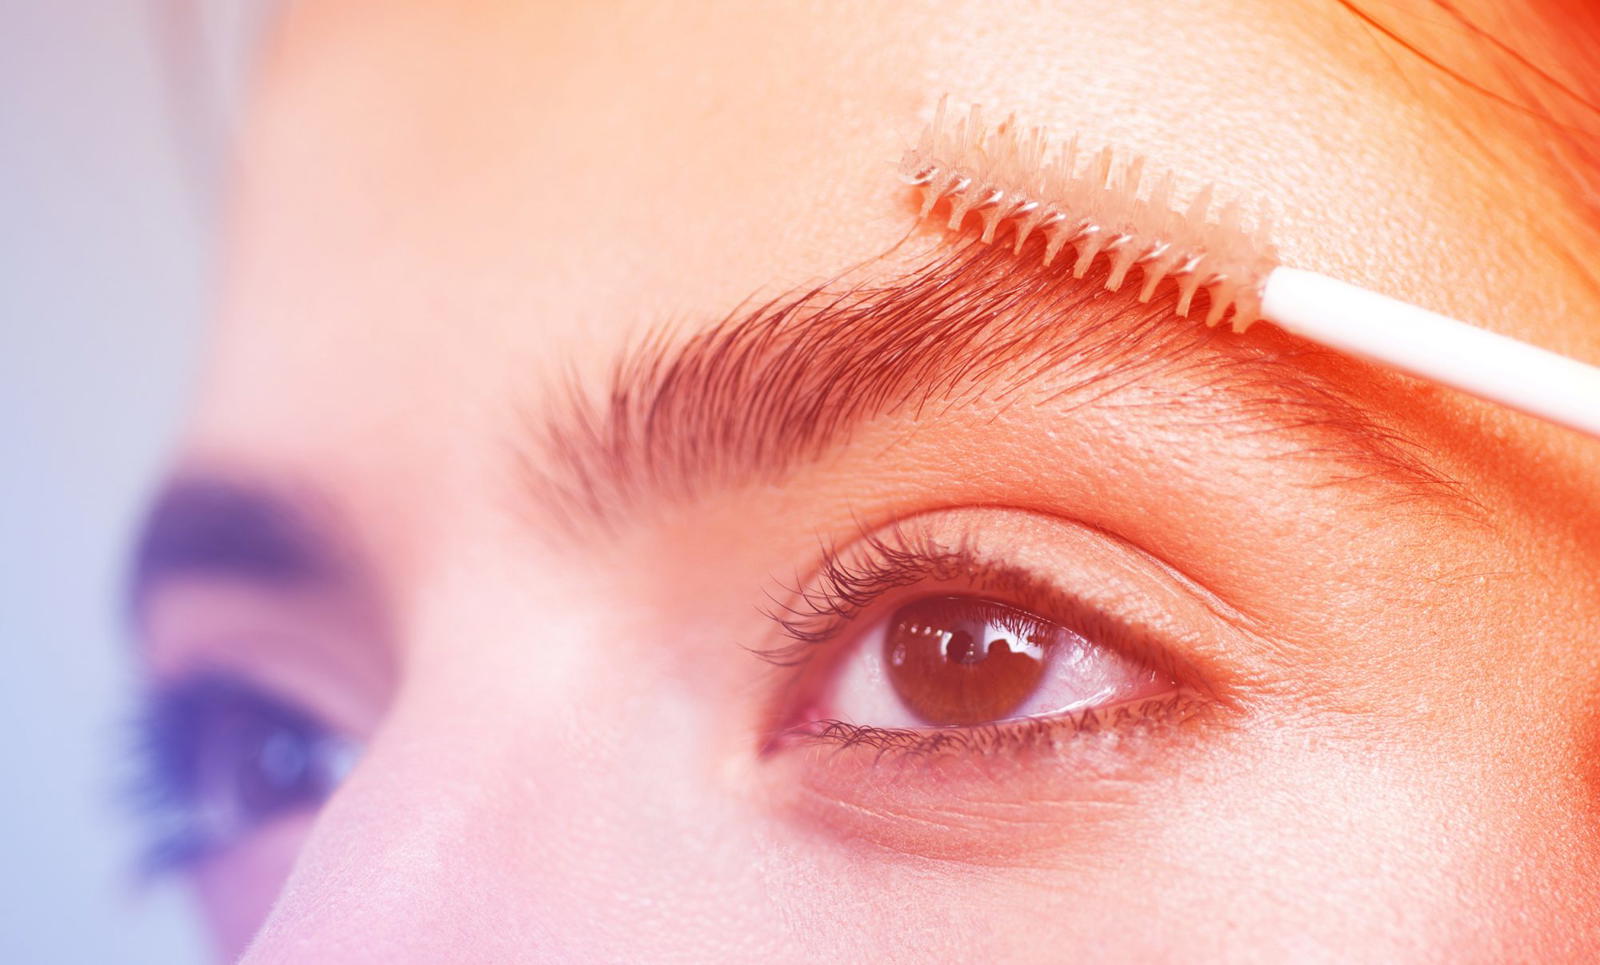 What stimulate eyebrow growth